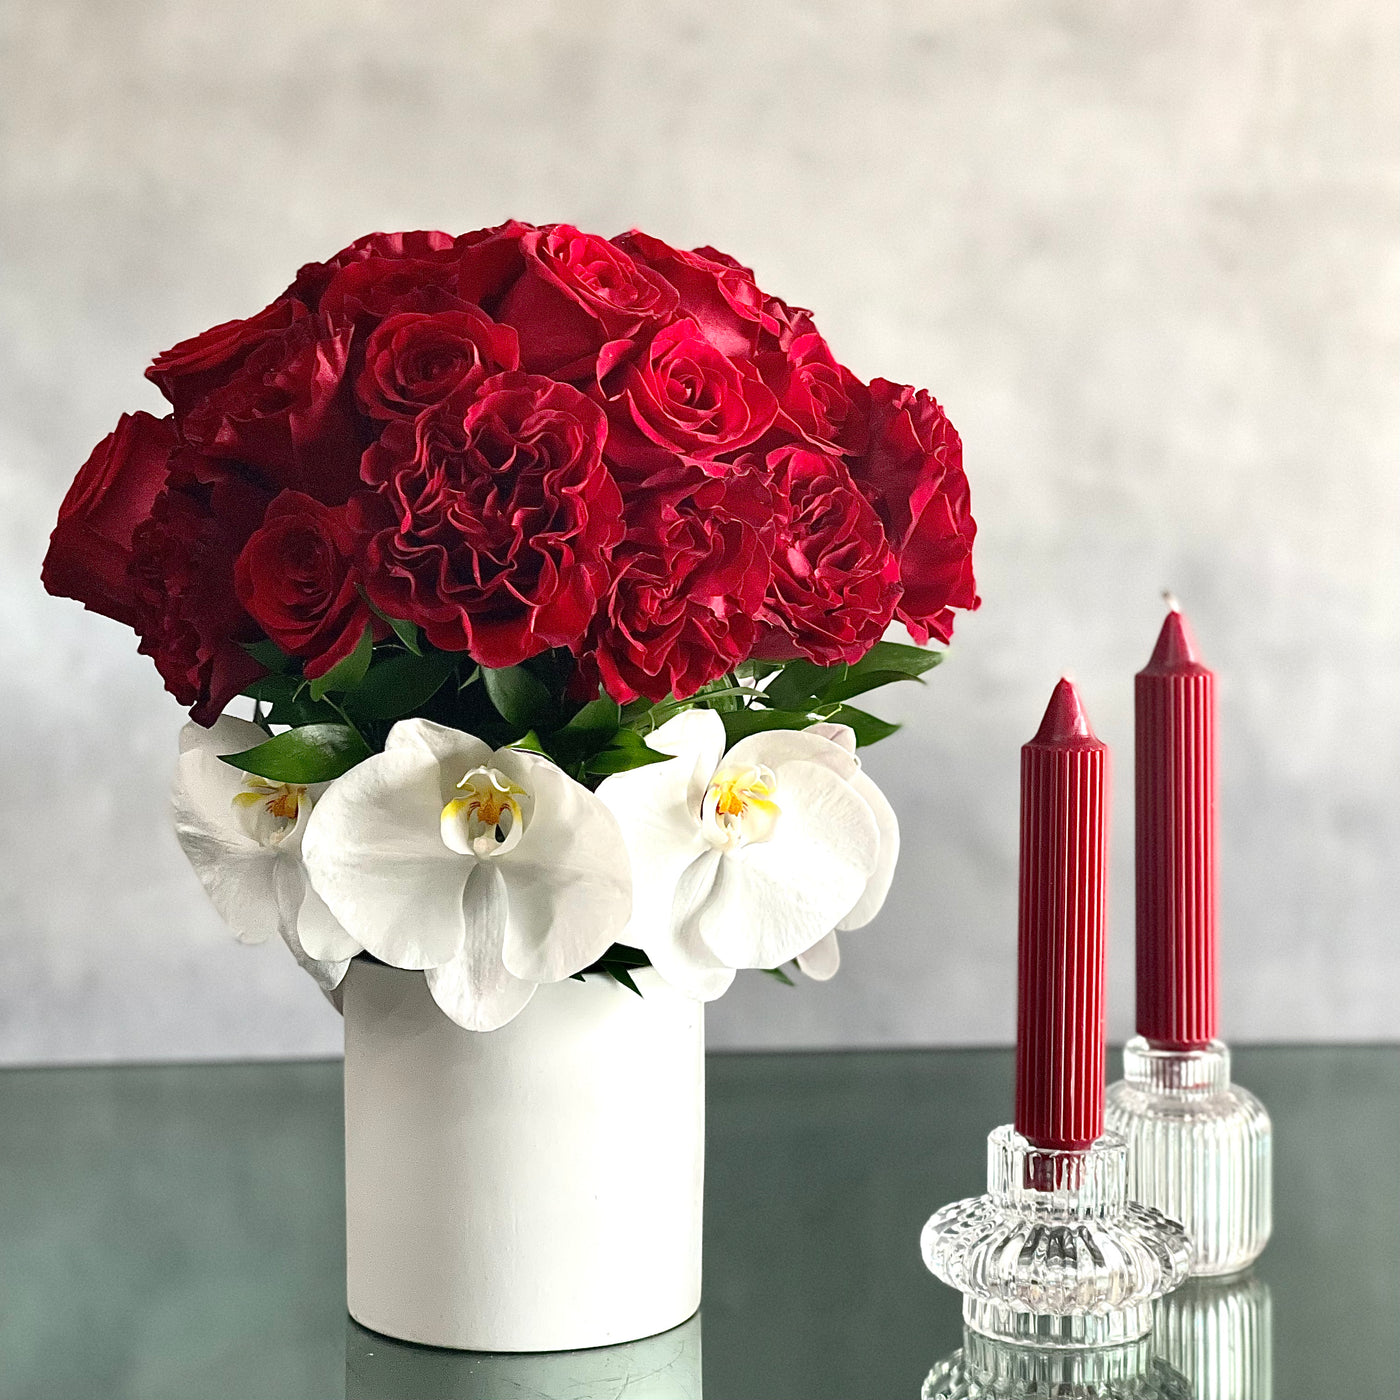 Red Roses, Same day delivery, just because, I love you, thinking of you, White Orchids